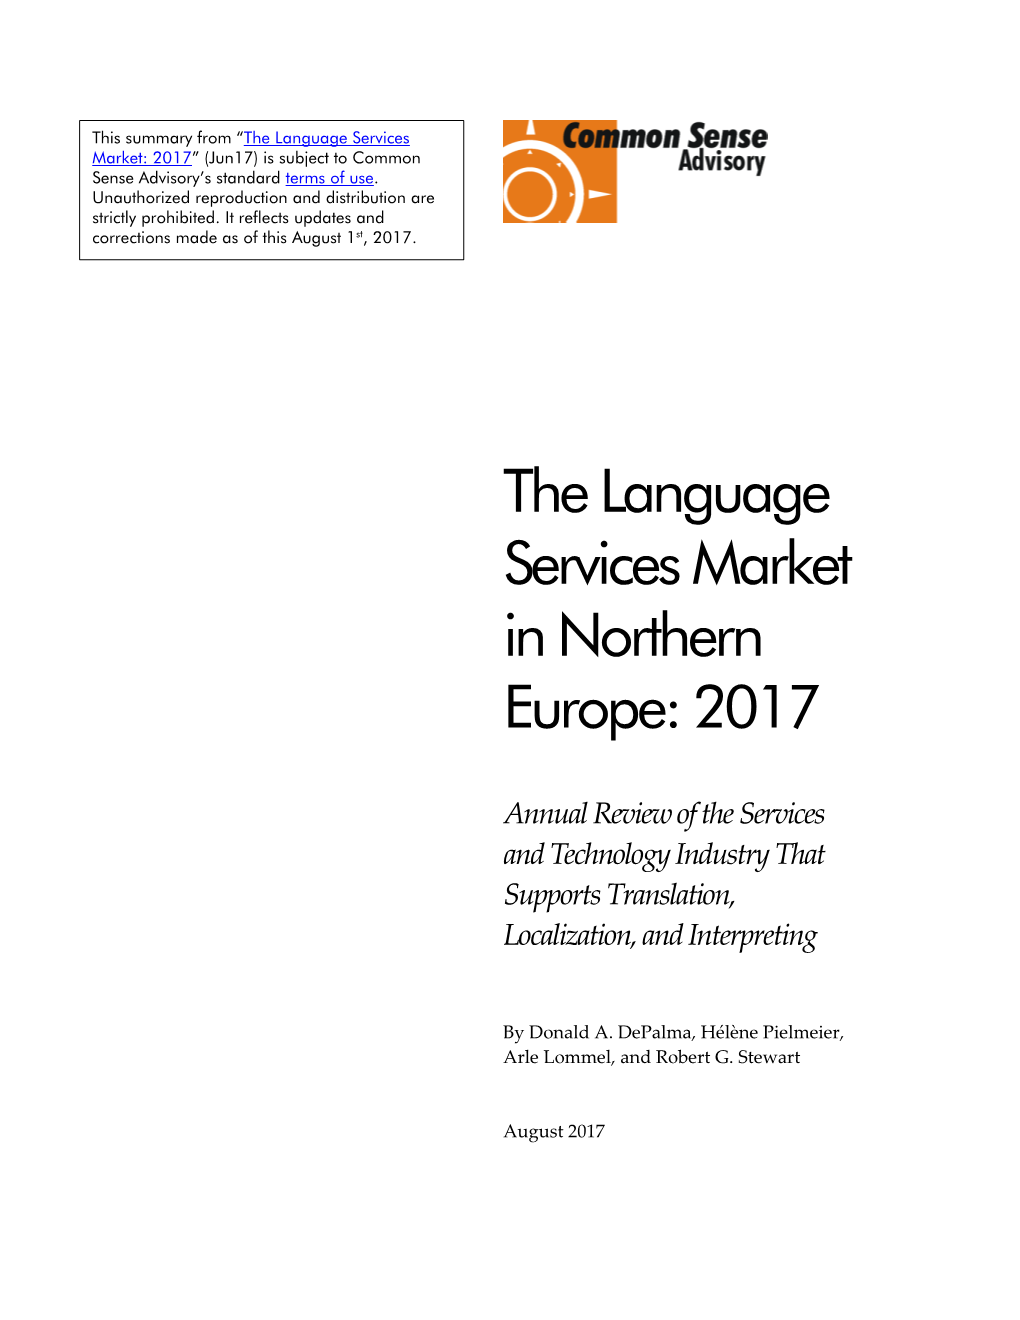 The Language Services Market in Northern Europe: 2017